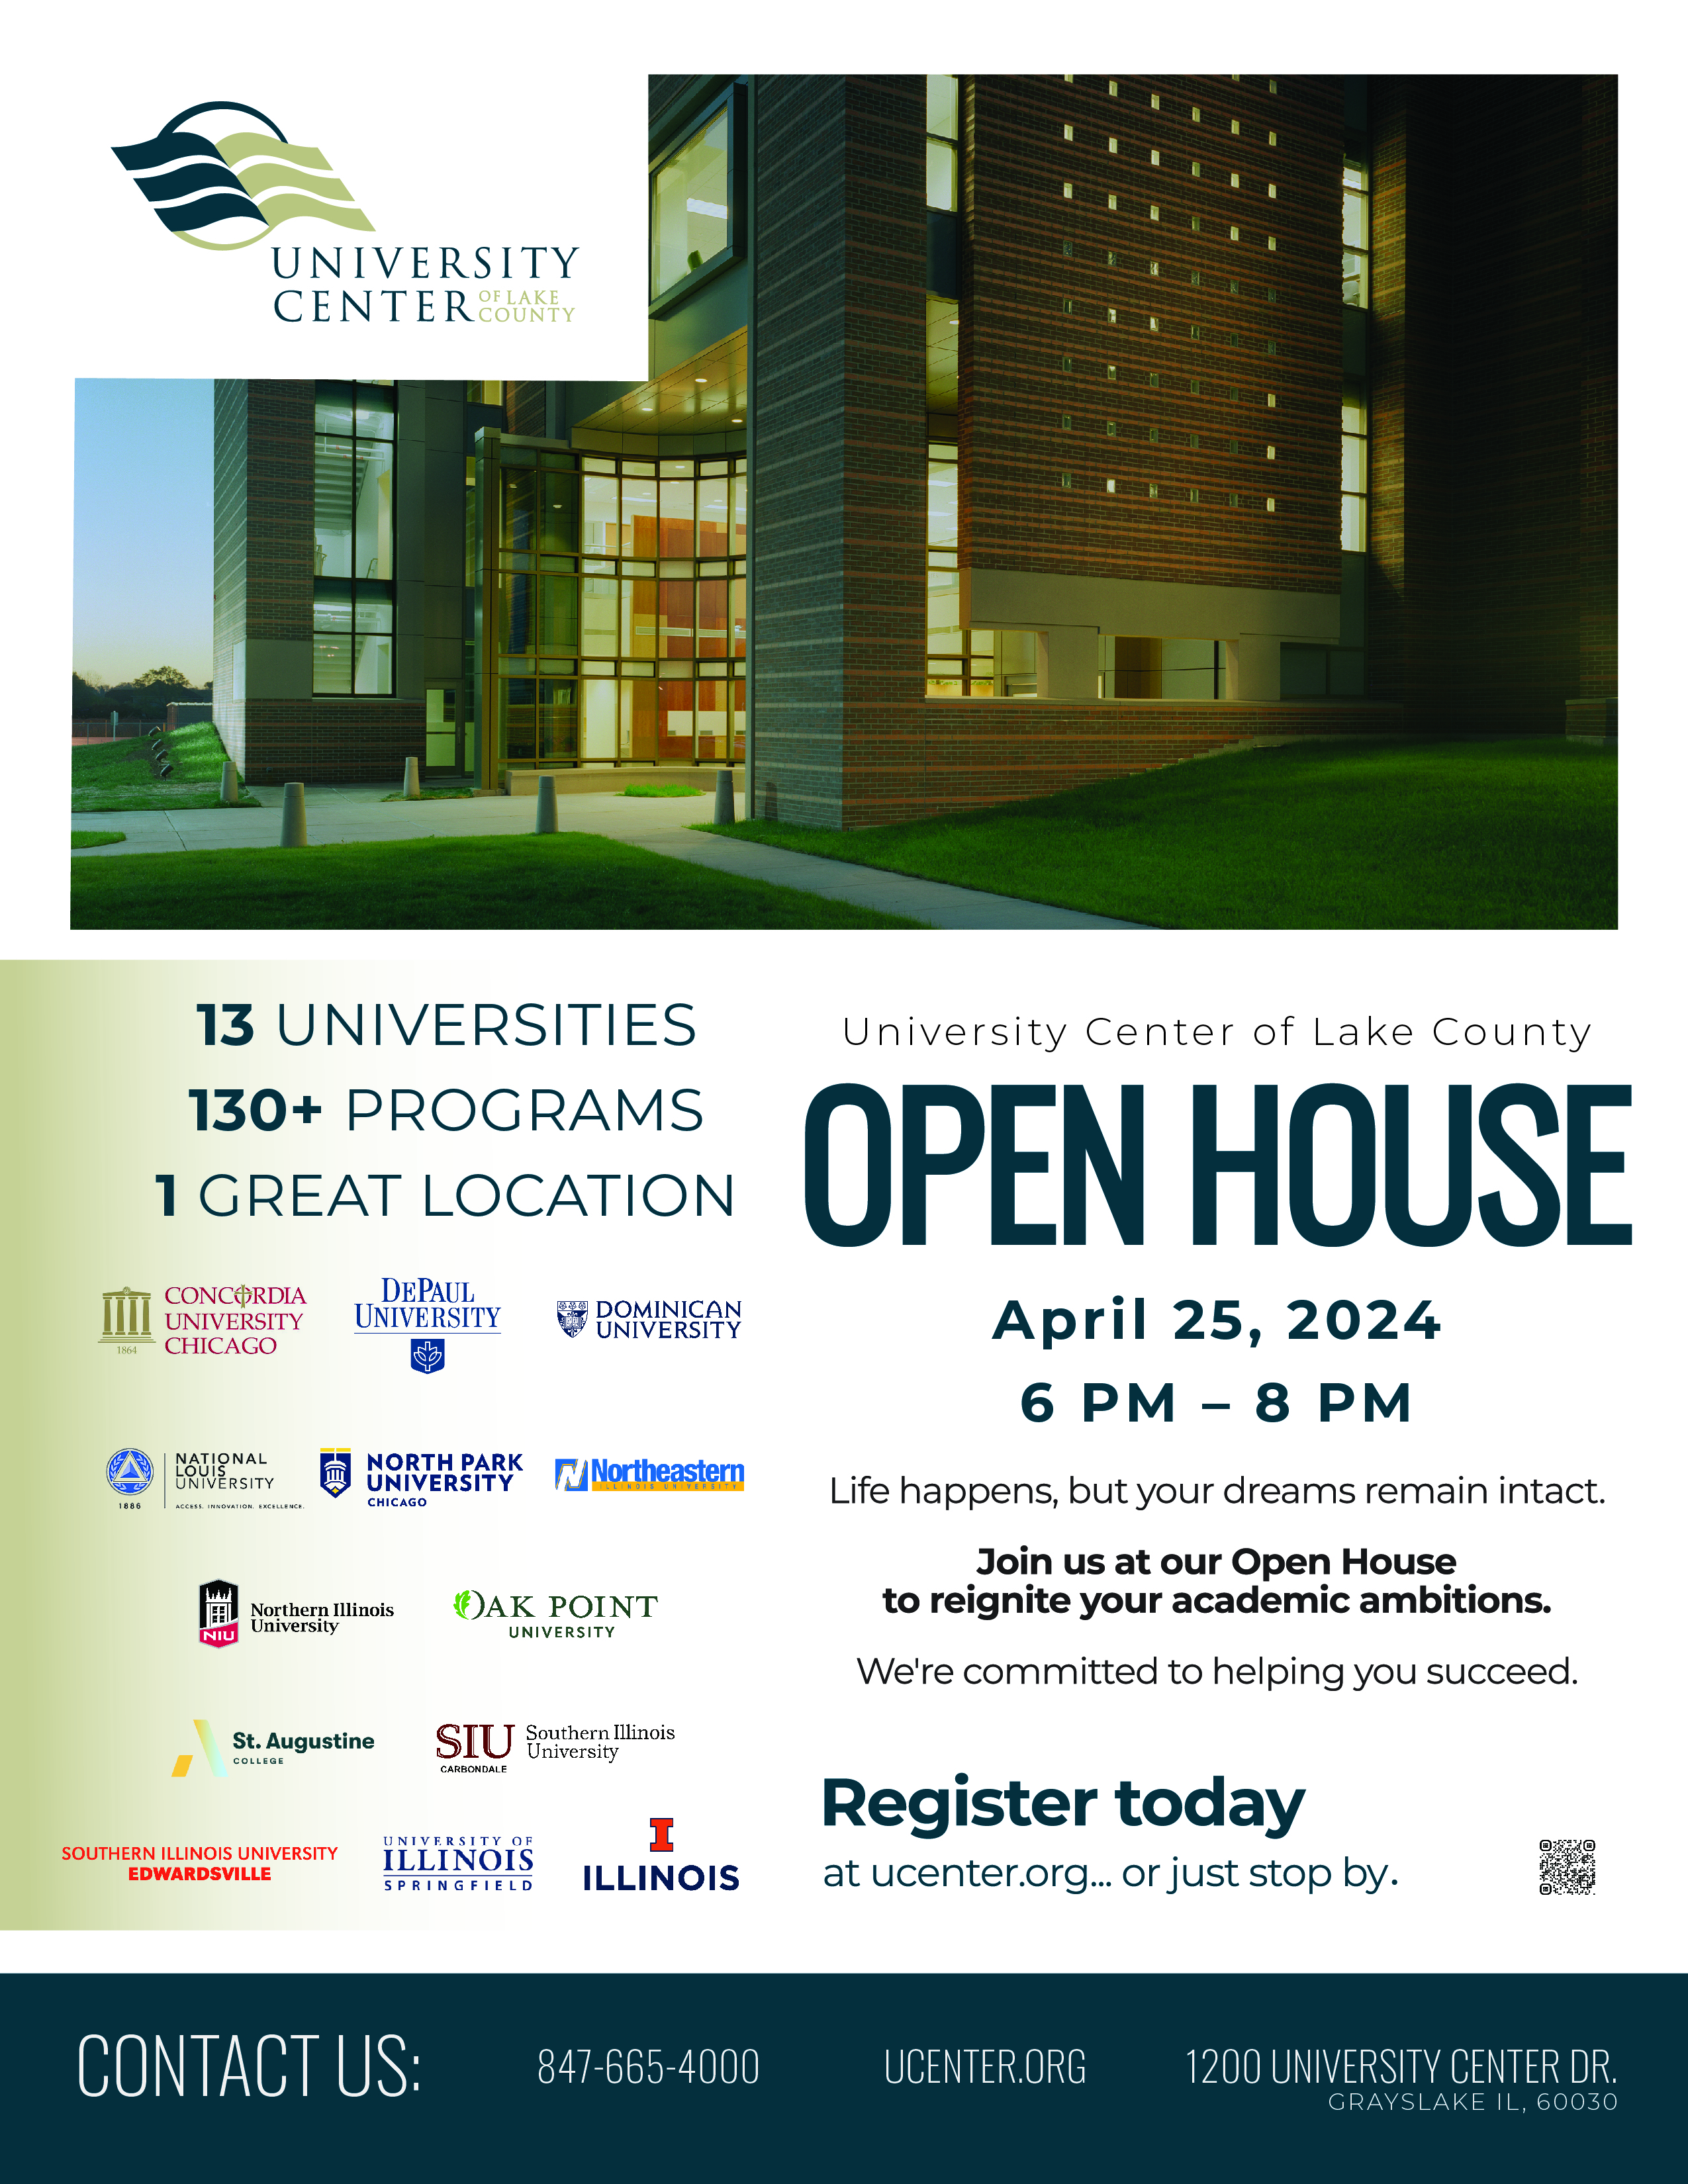 Open House at University Center of Lake County